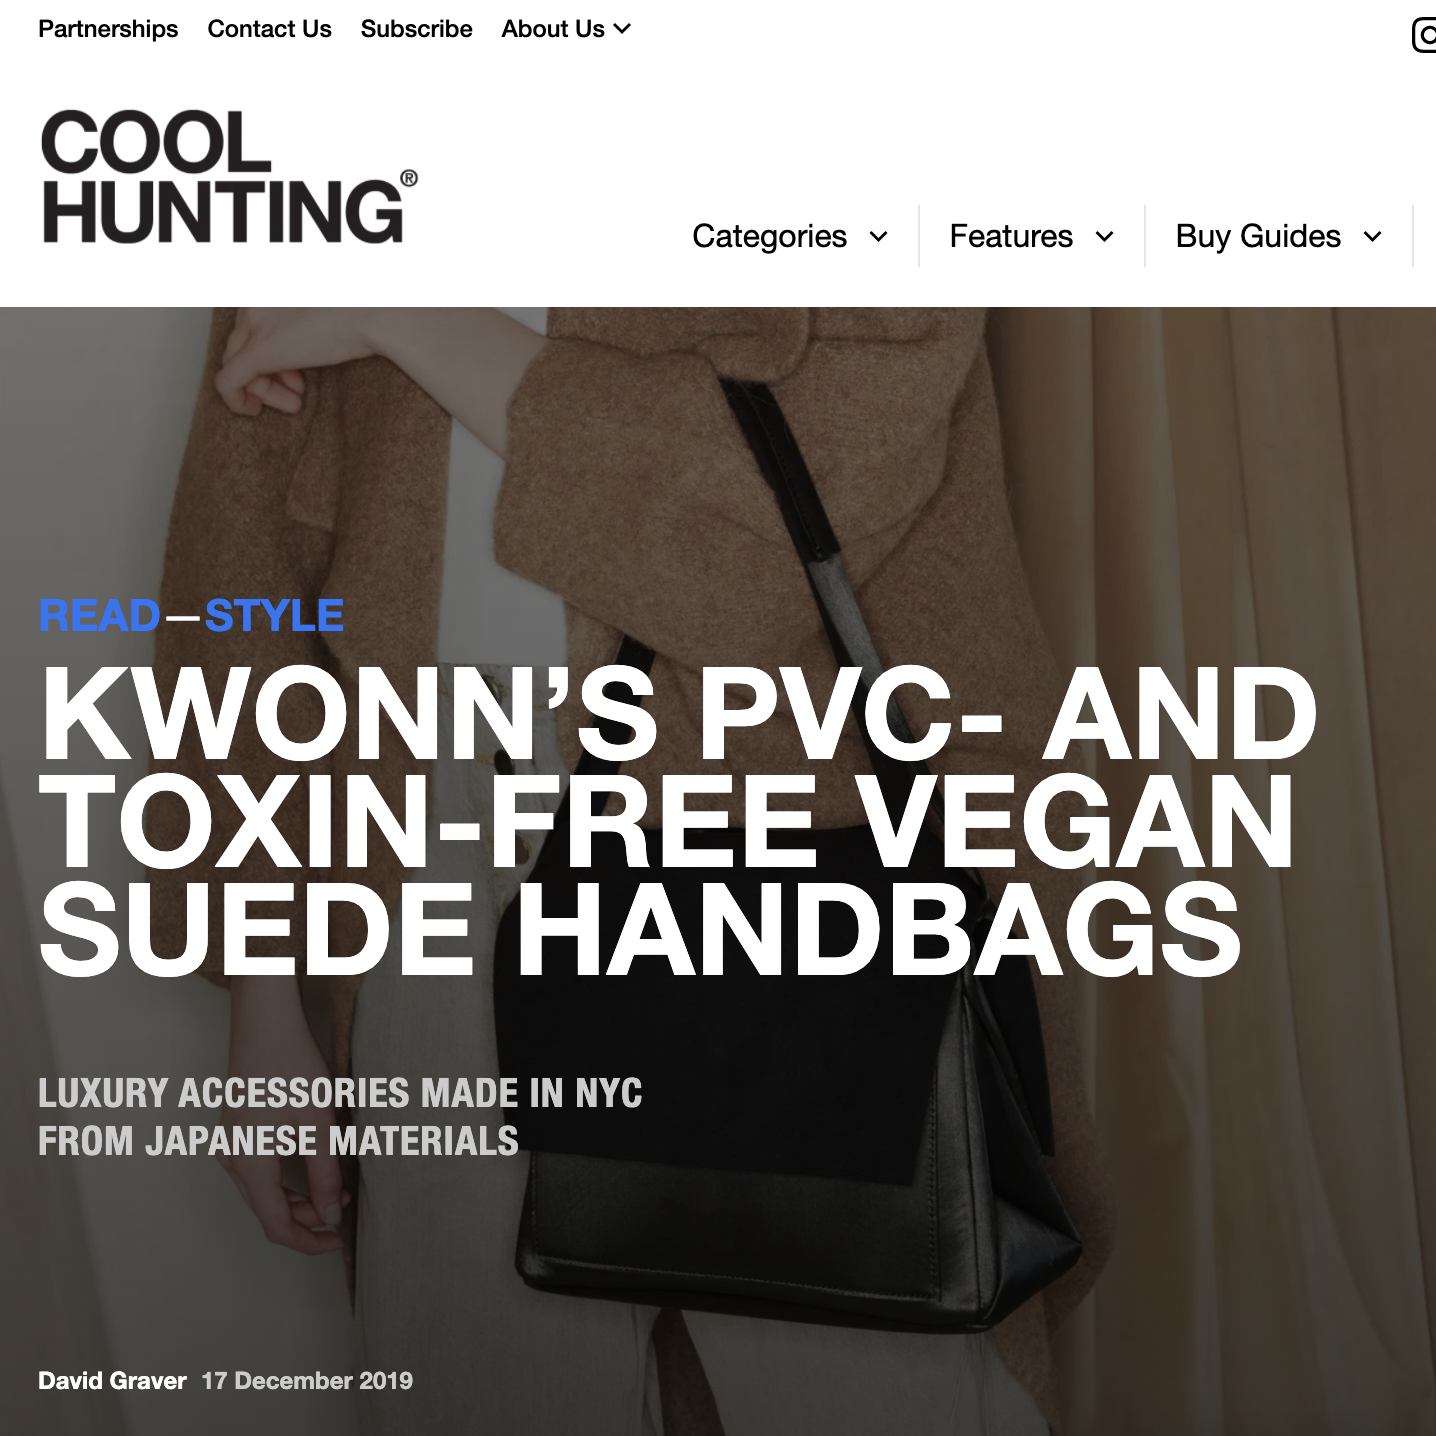 COOL HUNTING | KWONN'S PVC- AND TOXIN-FREE VEGAN SUEDE HANDBAGS: LUXURY ACCESSORIES MADE IN NYC FROM JAPANESE MATERIALS